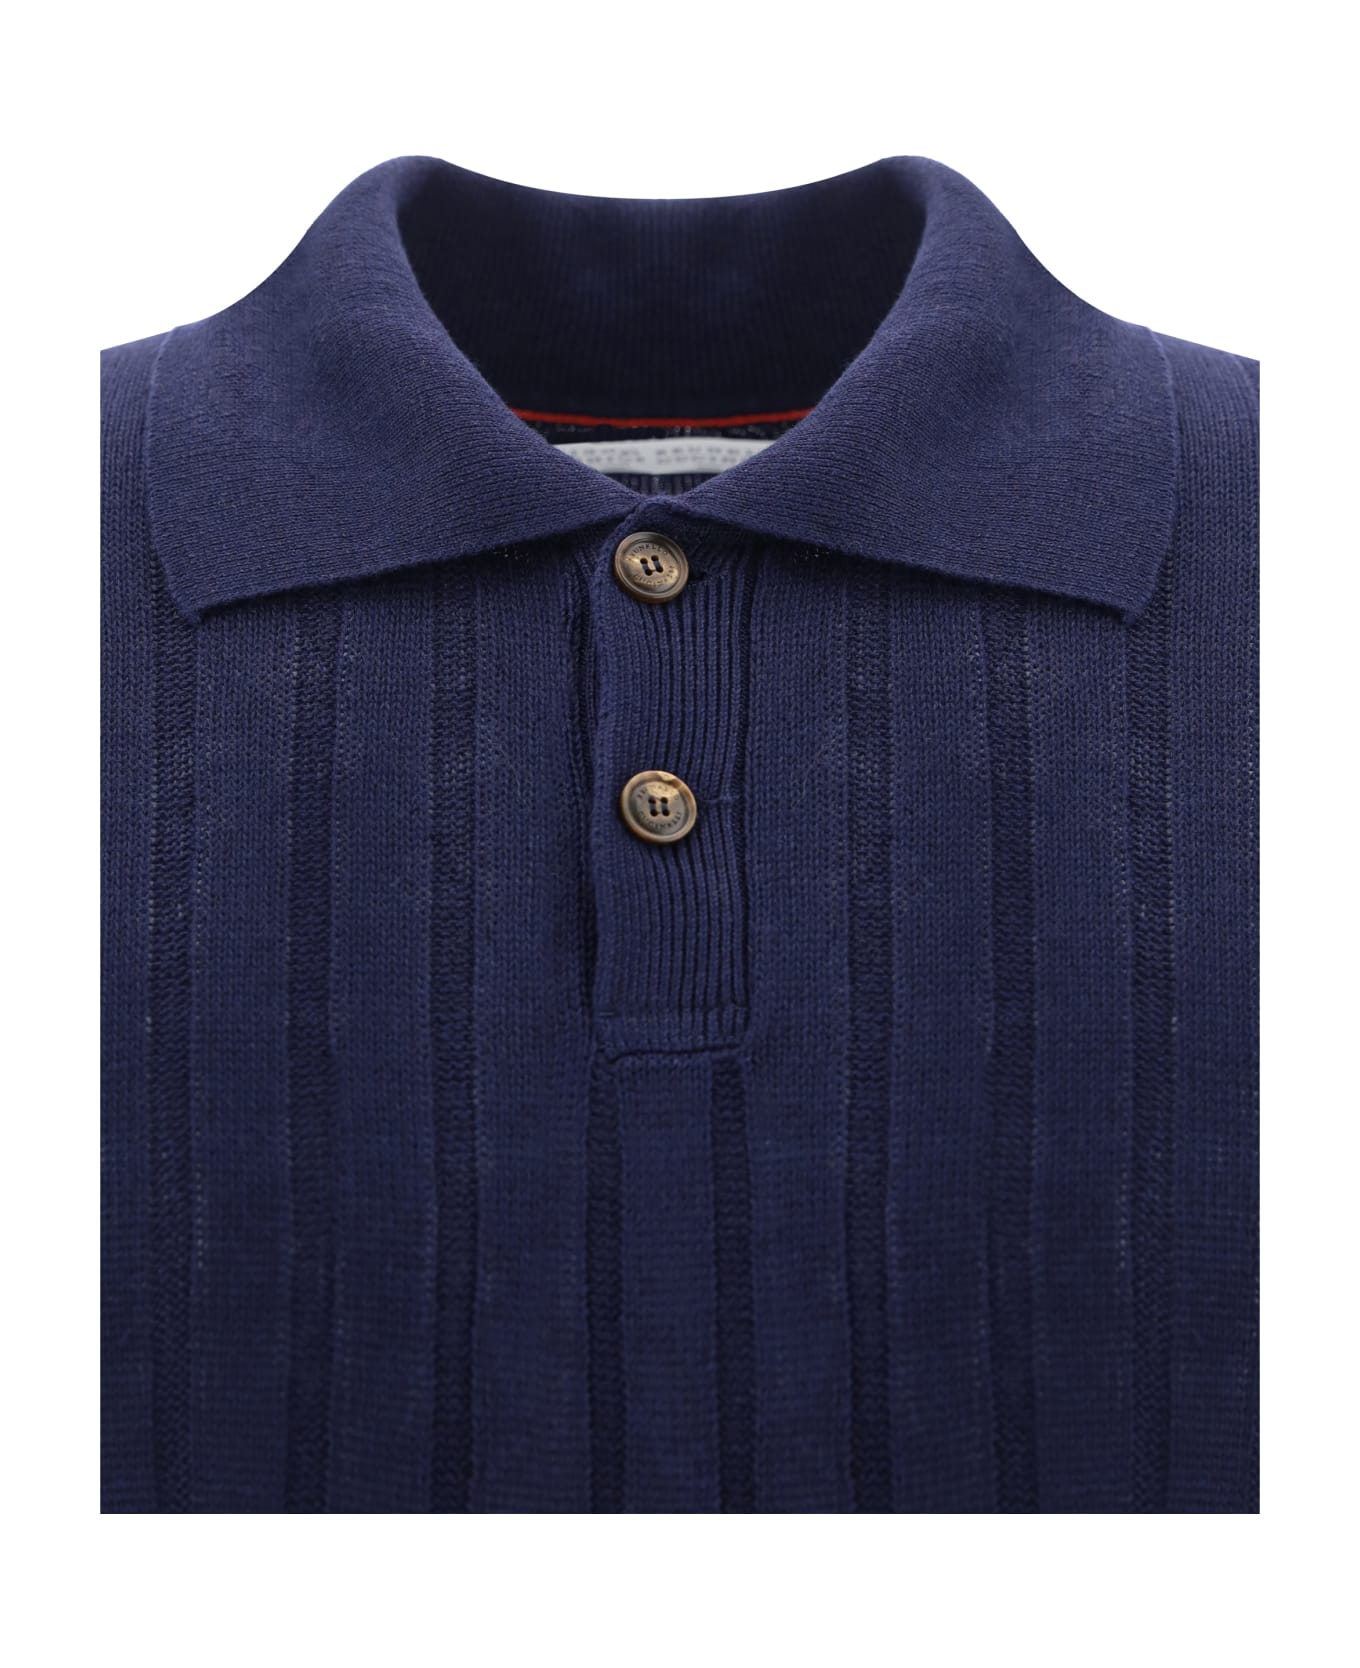 Brunello Cucinelli Polo Shirt - Navy+oyster ポロシャツ